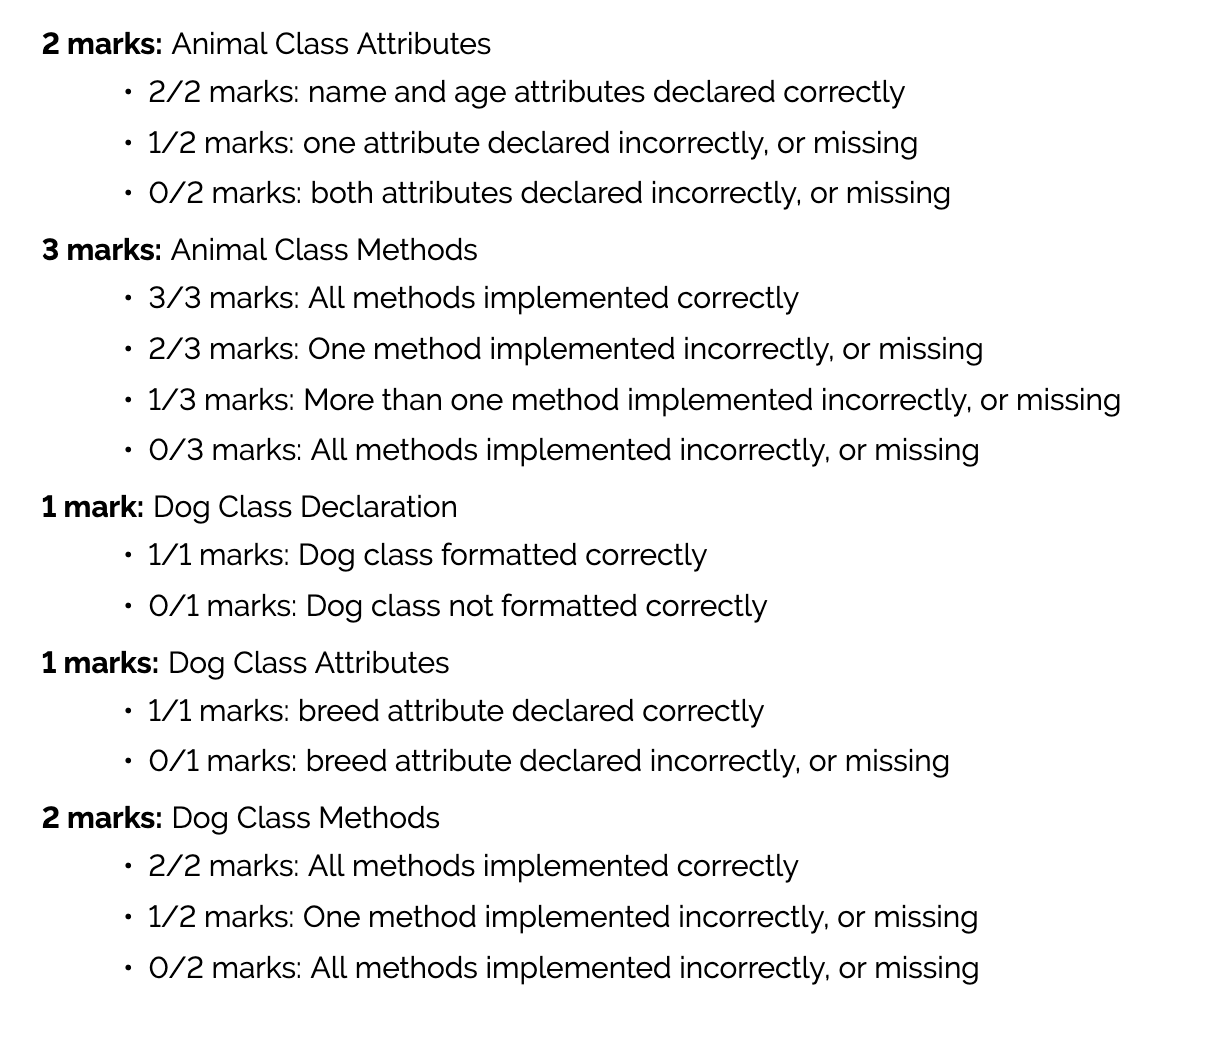 2 marks: Animal Class Attributes 2/2 marks: name and age attributes declared correctly  1/2 marks: one